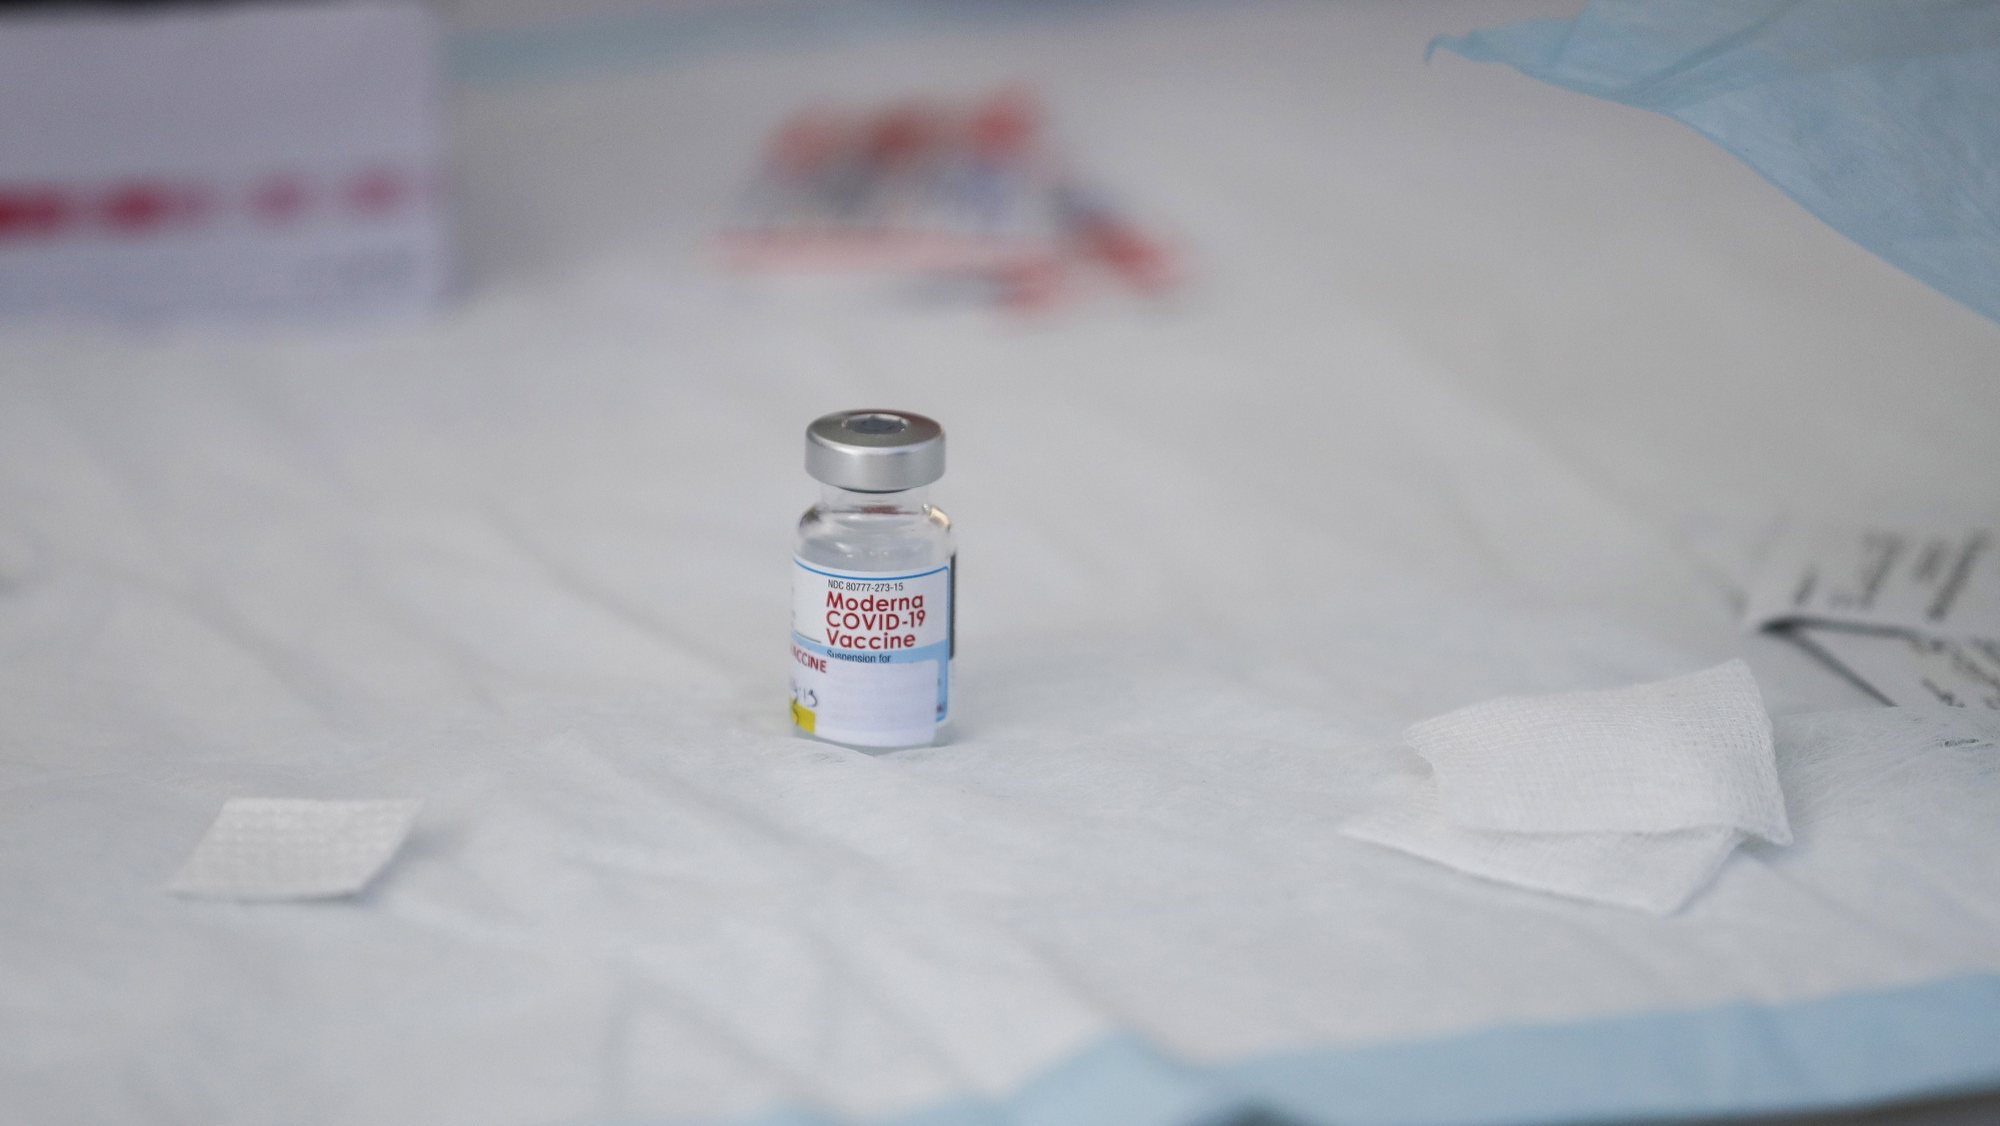 epa09482475 A vial containing Moderna Covid-19 vaccine sits on a table at a clinic for individuals experiencing homelessness at San Julian Park in Los Angeles, California, USA, 22 September 2021.  EPA/CAROLINE BREHMAN